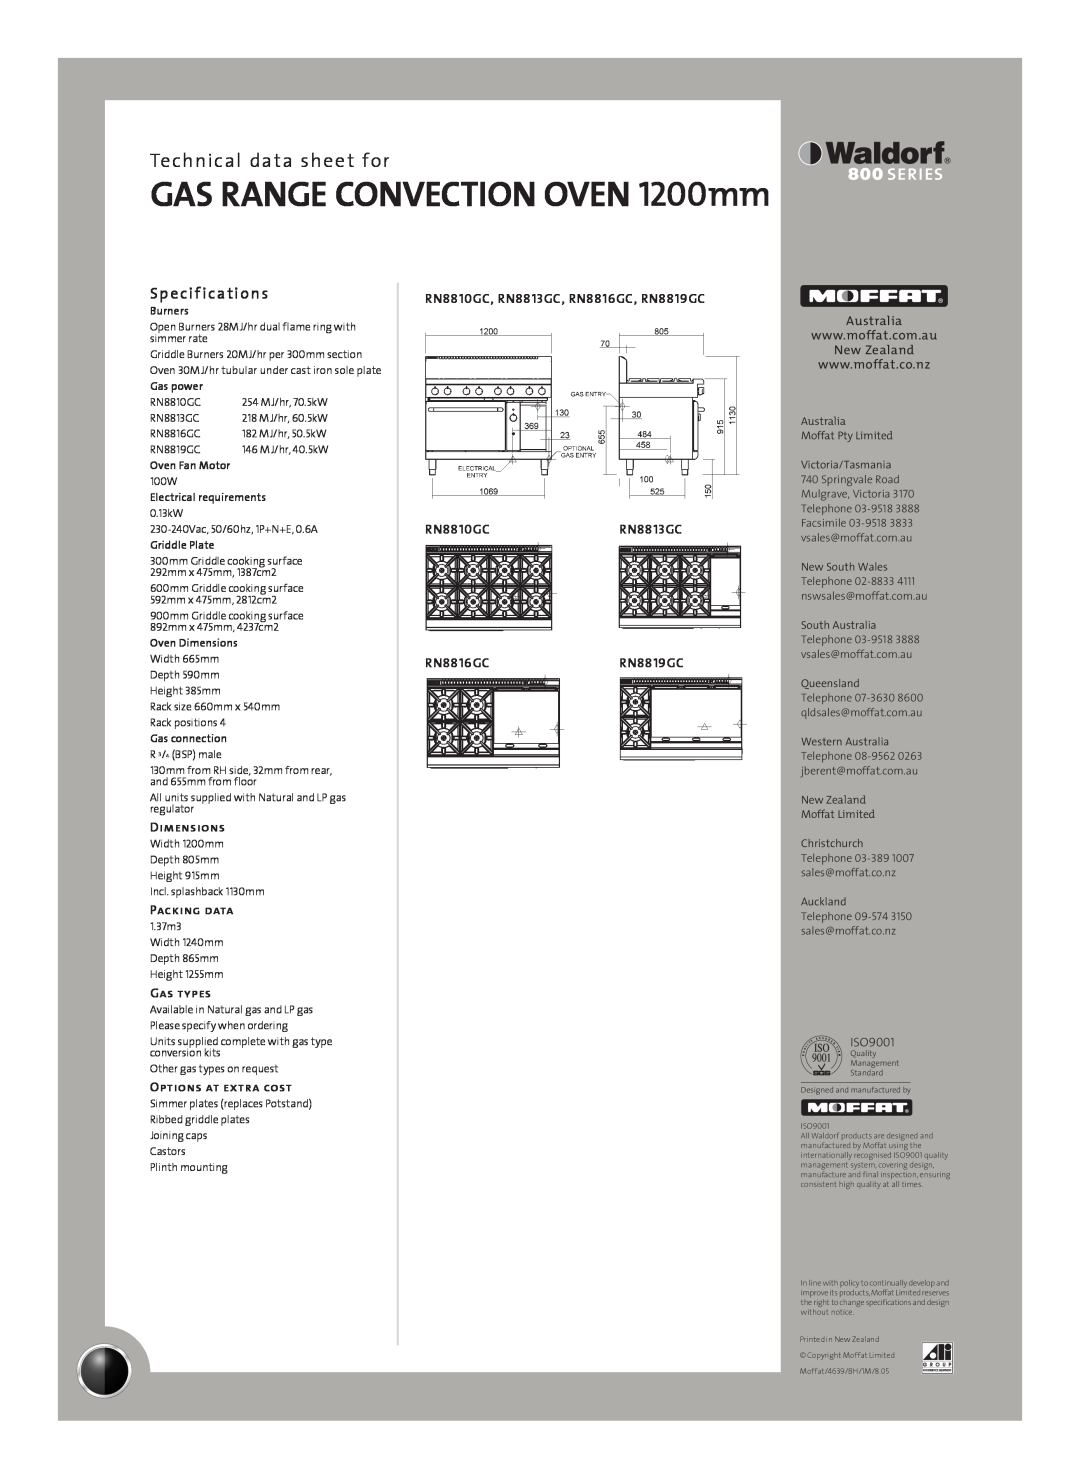 Moffat RN8813GC Sp e cif ications, GAS RANGE CONVECTION OVEN 1200mm, Technical data sheet for, Dimensions, Packing data 